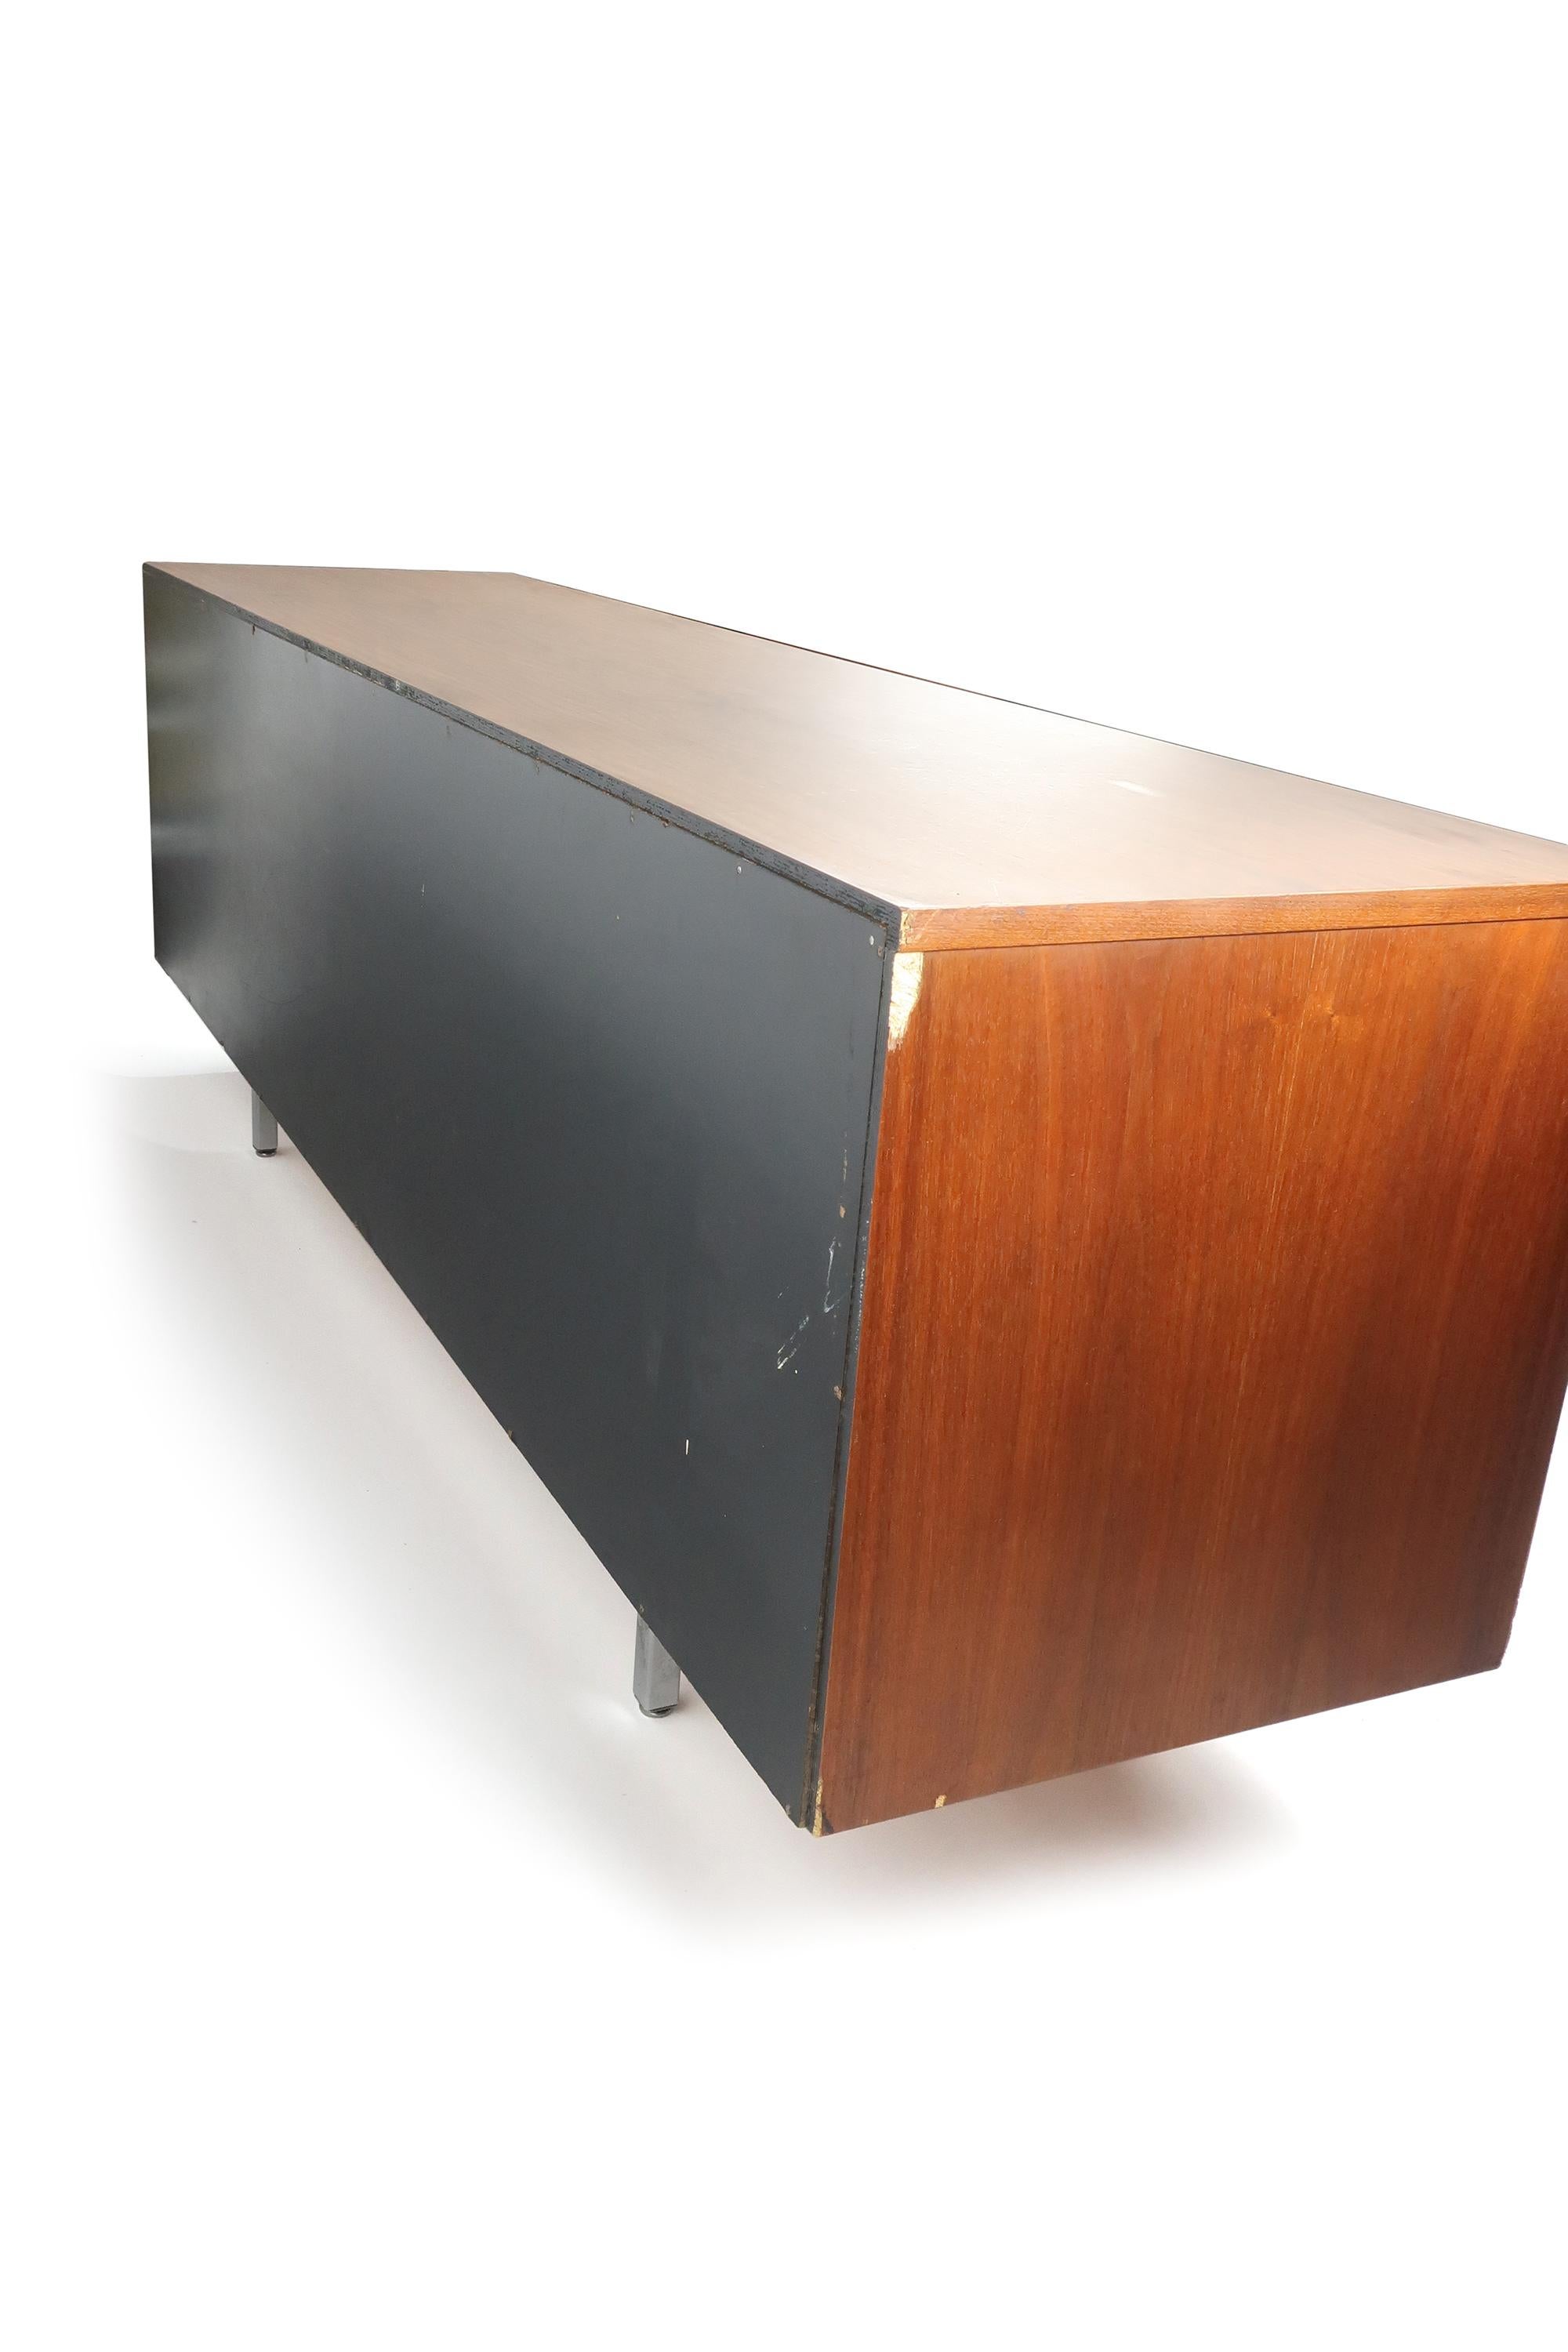 George Nelson for Herman Miller Walnut Executive Office Group Credenza 1